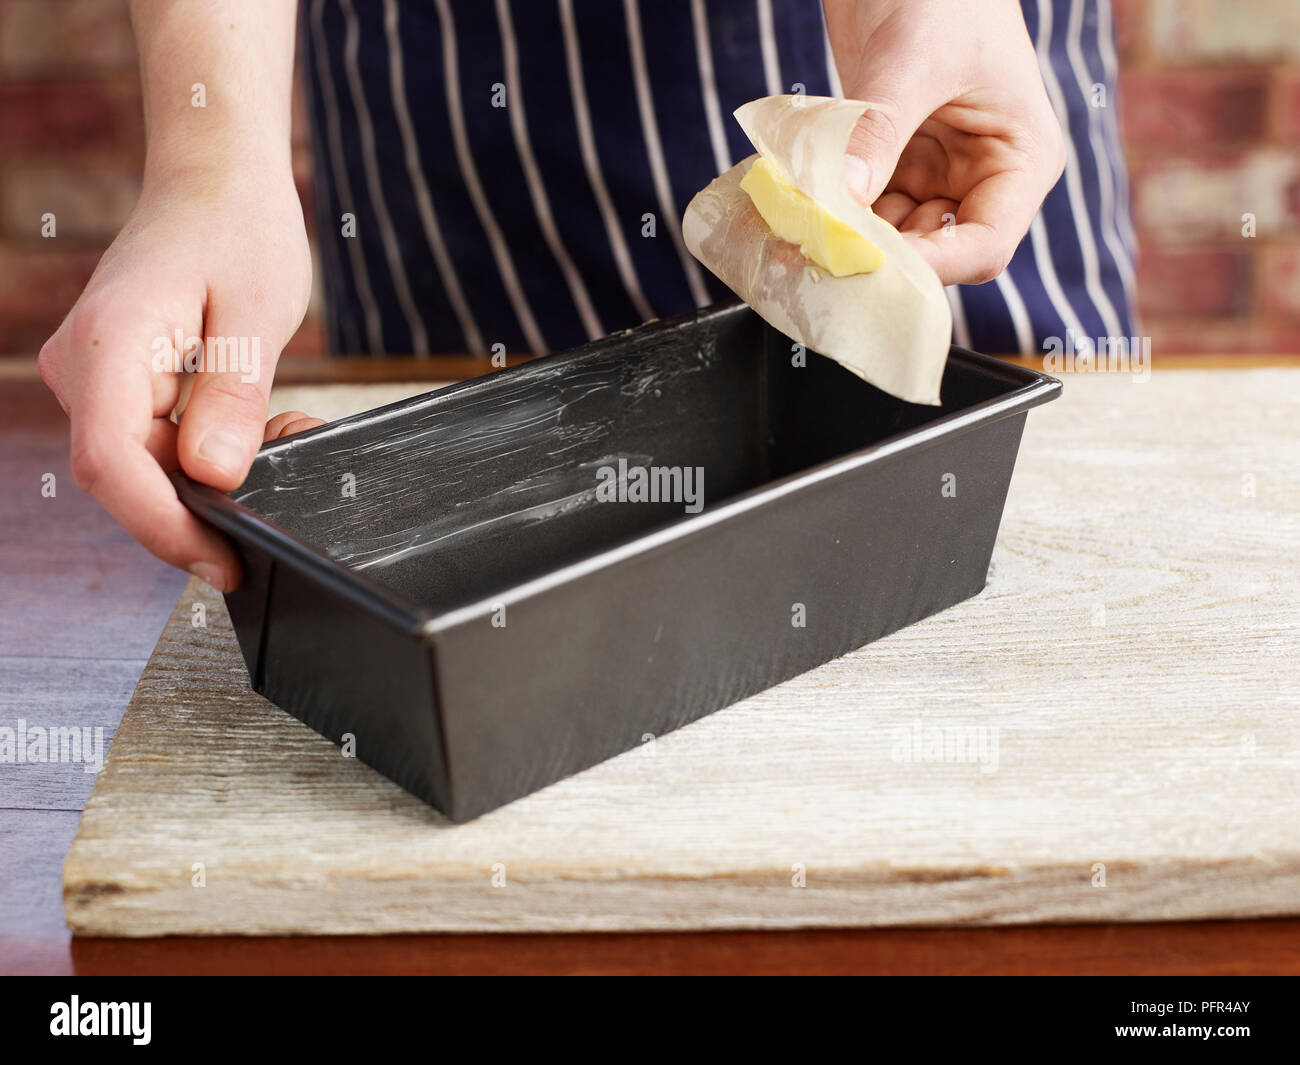 Making bread, buttering a loaf baking tin Stock Photo